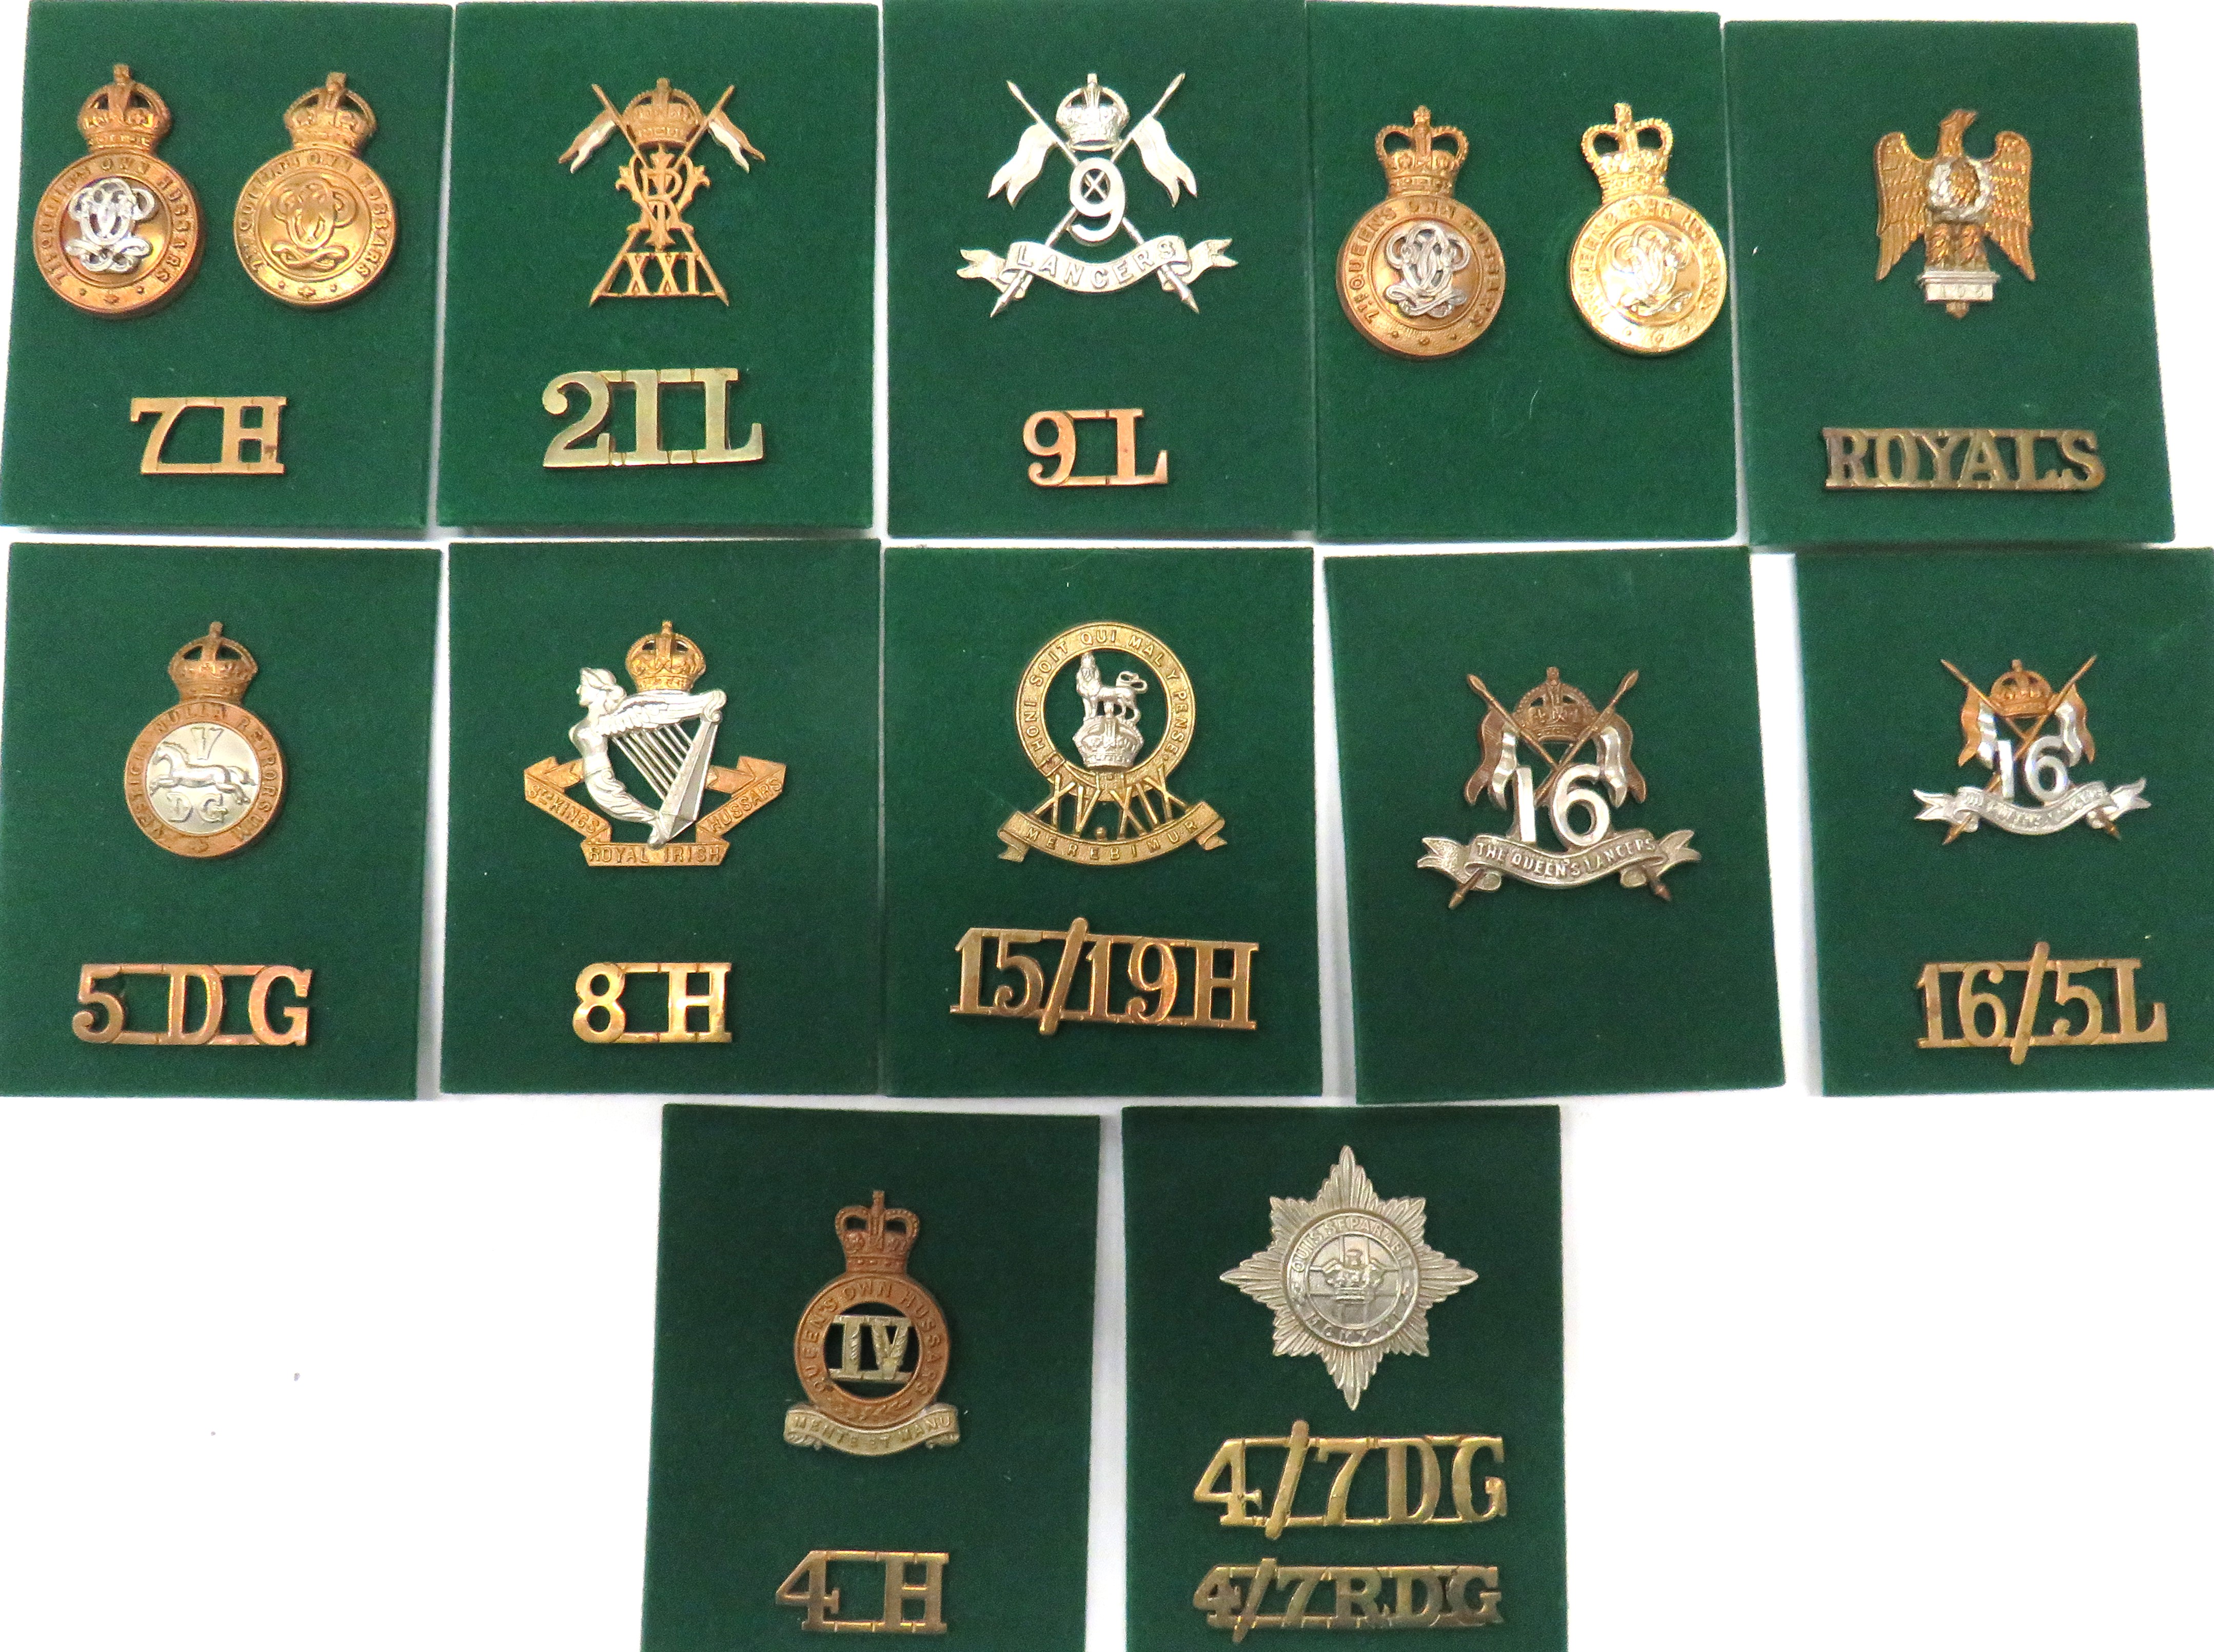 25 x Cavalry Cap Badges And Titles cap include bi-metal KC 21st Lancers ... White metal KC 9th